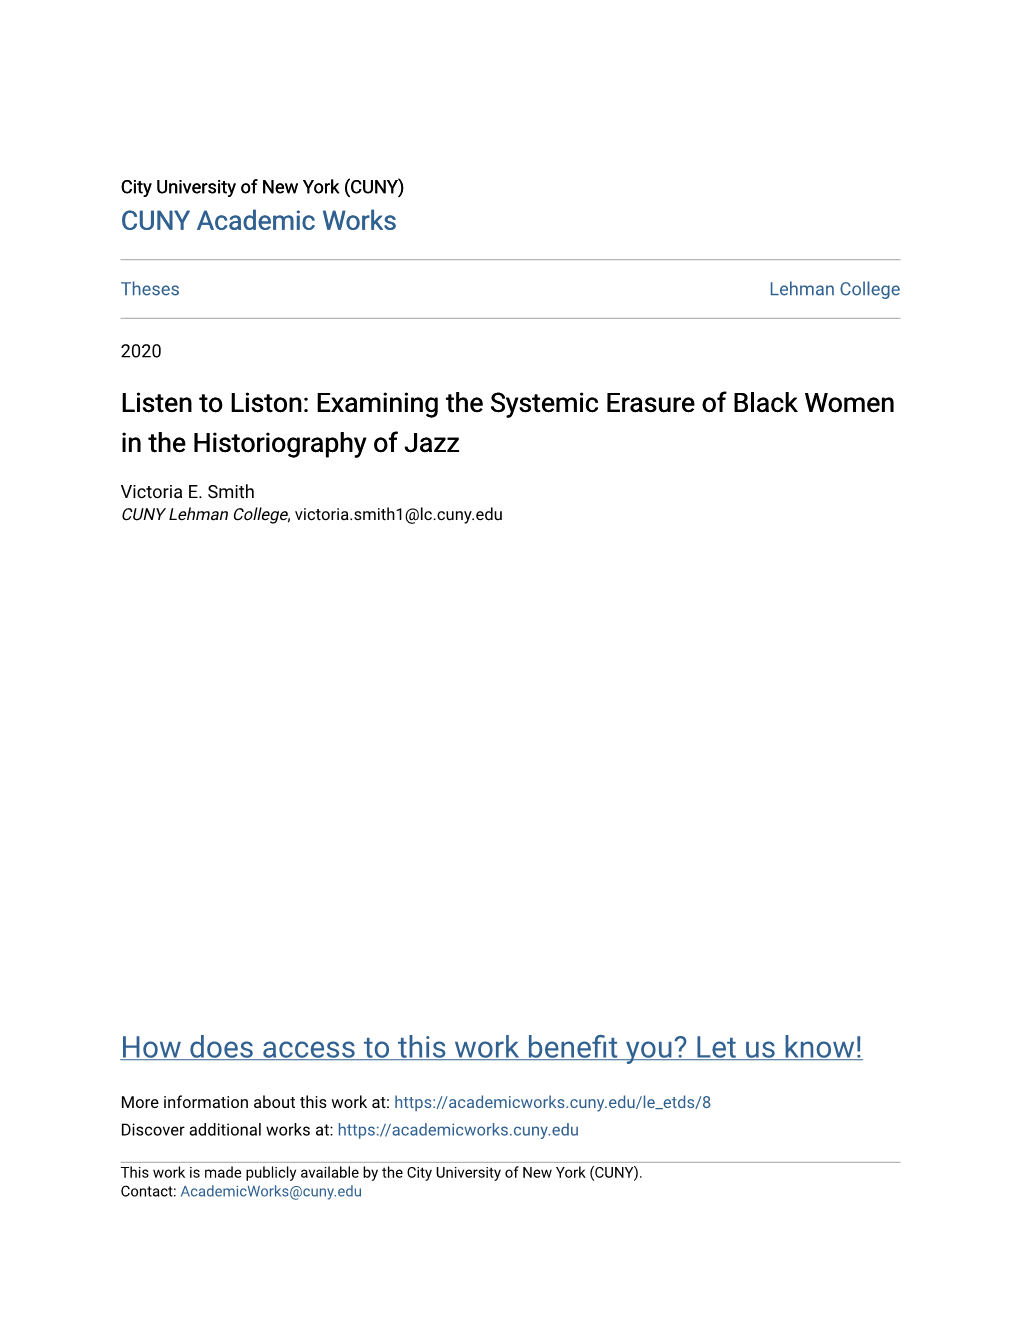 Listen to Liston: Examining the Systemic Erasure of Black Women in the Historiography of Jazz